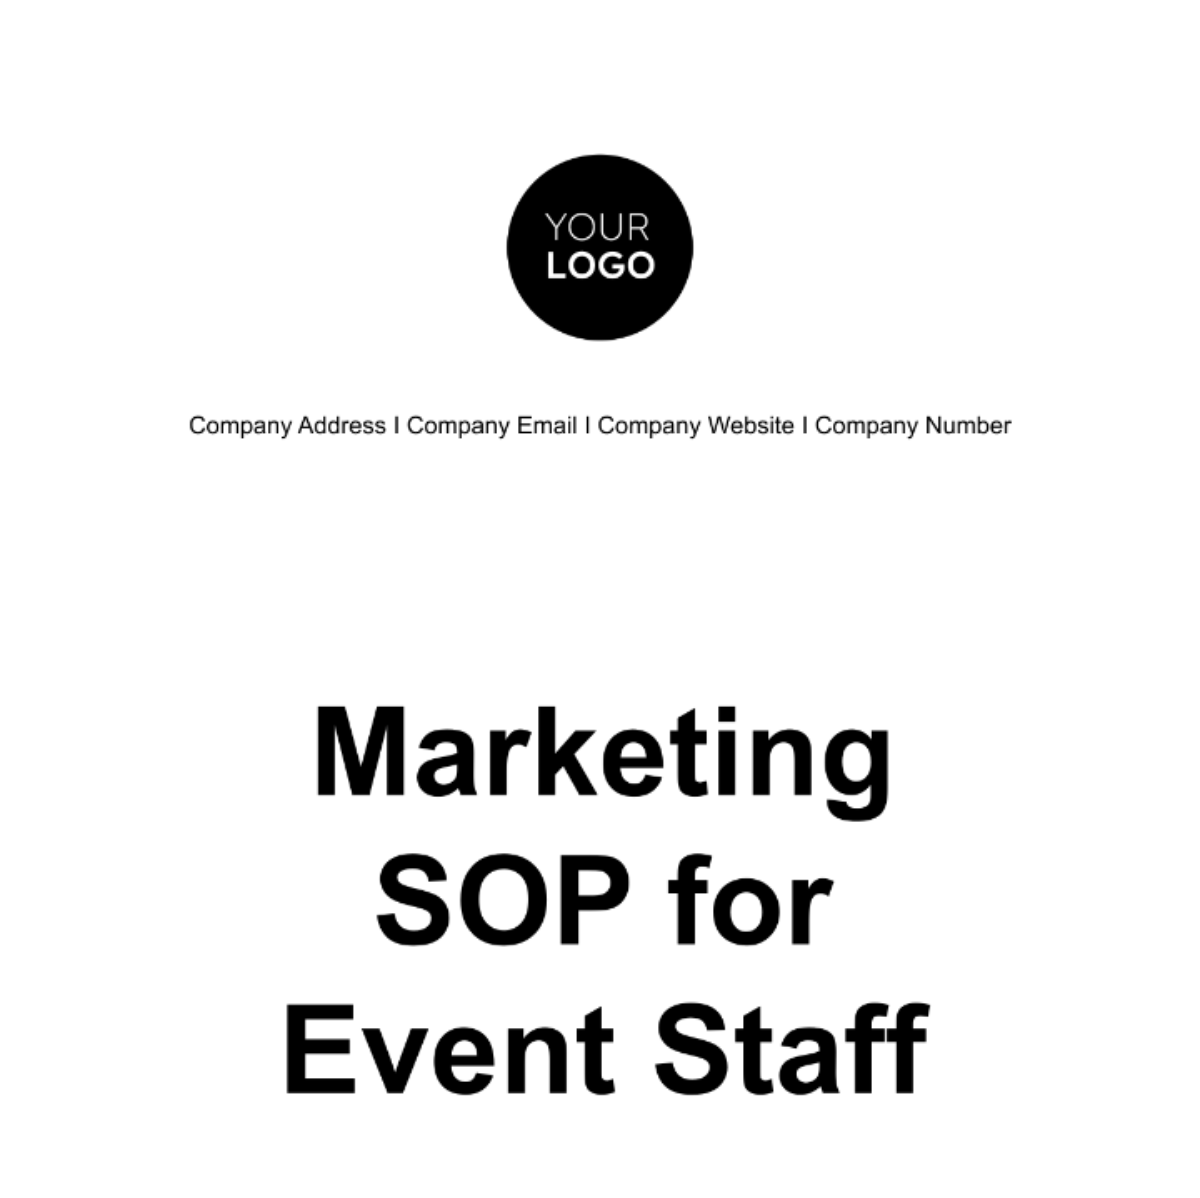 Marketing Standard Operating Procedure for Event Staff Template